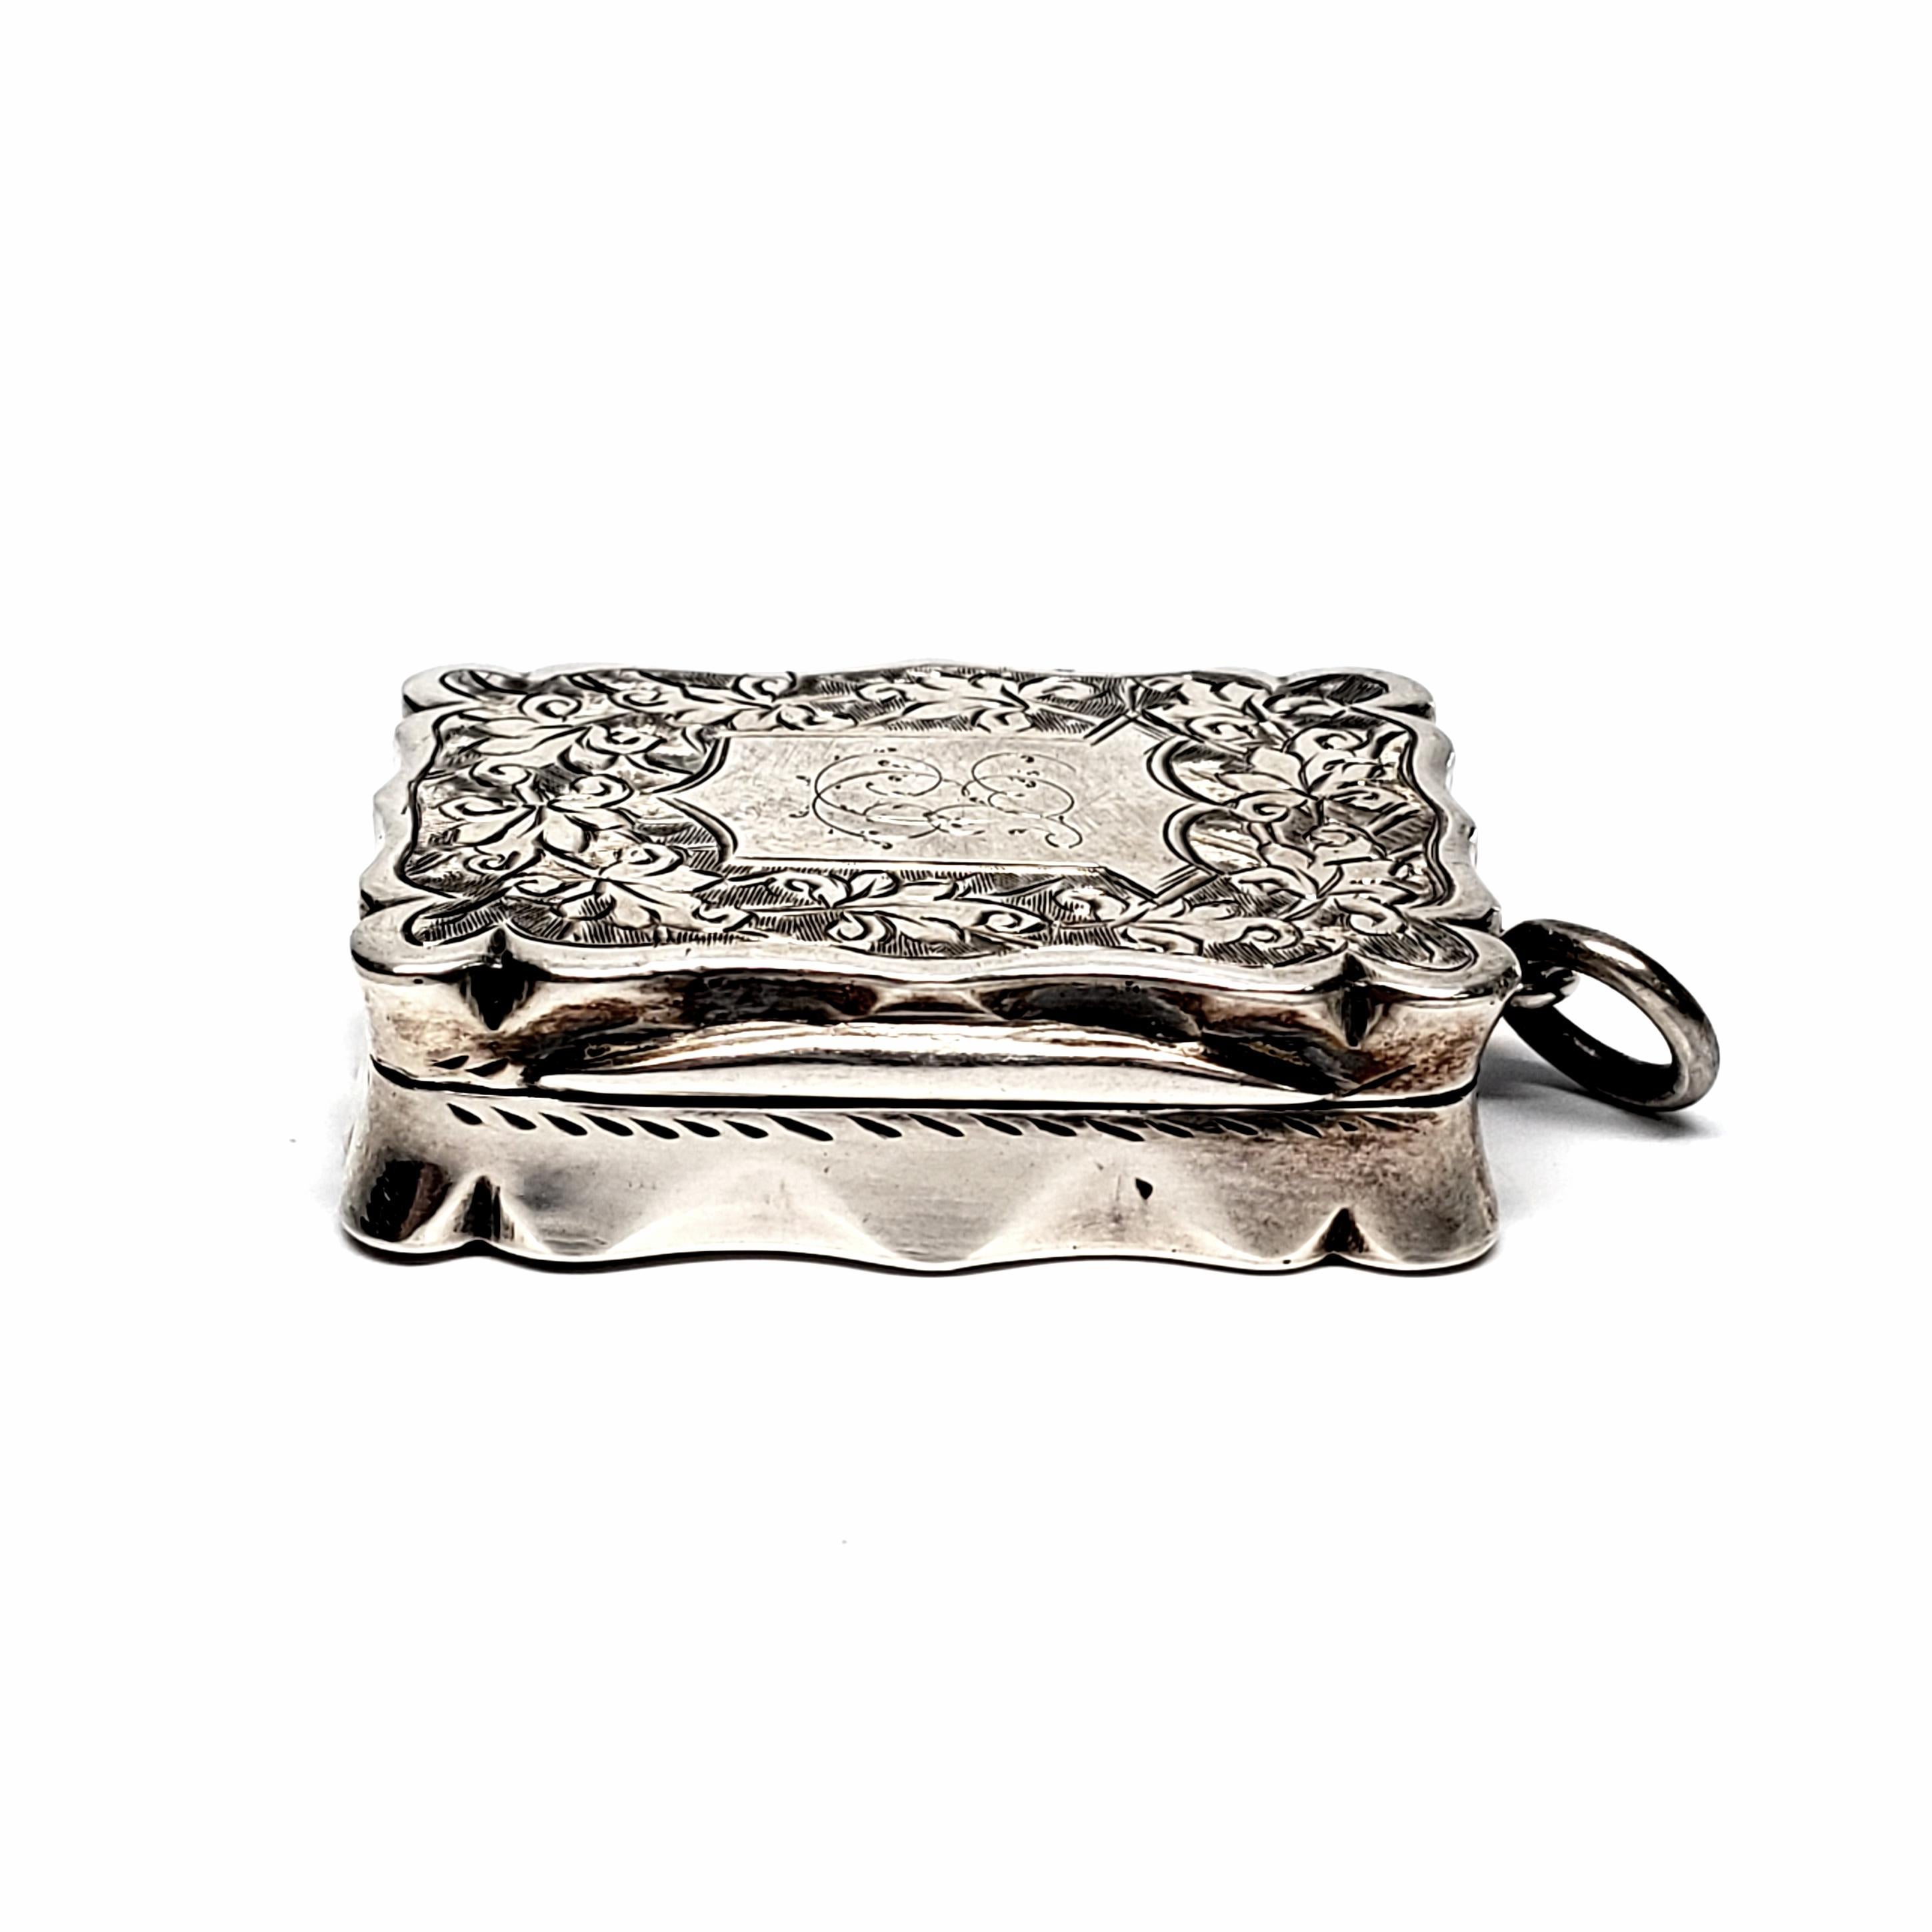 Antique sterling silver vinaigrette box by Colen Chesire, circa 1886.

This is a beautiful example of the small decorative boxes that were used to carry perfume and scents when traveling. The scent would be soaked into a sponge that would be